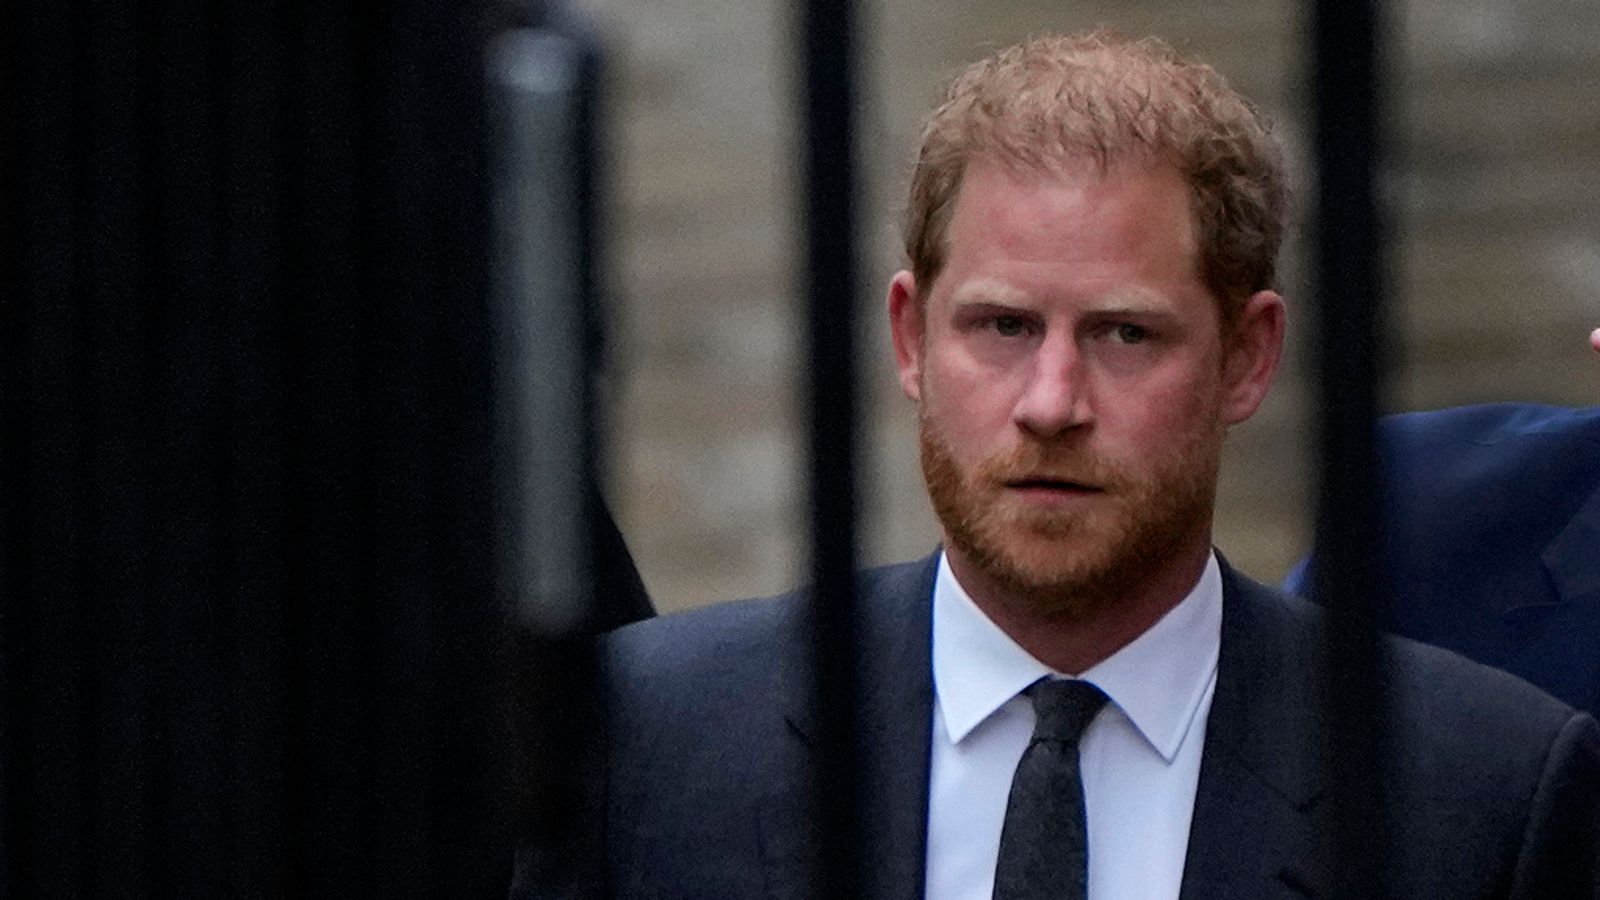 Prince Harry has score to settle in High Court appearance - but barrister will try to 'tear his case to shreds'